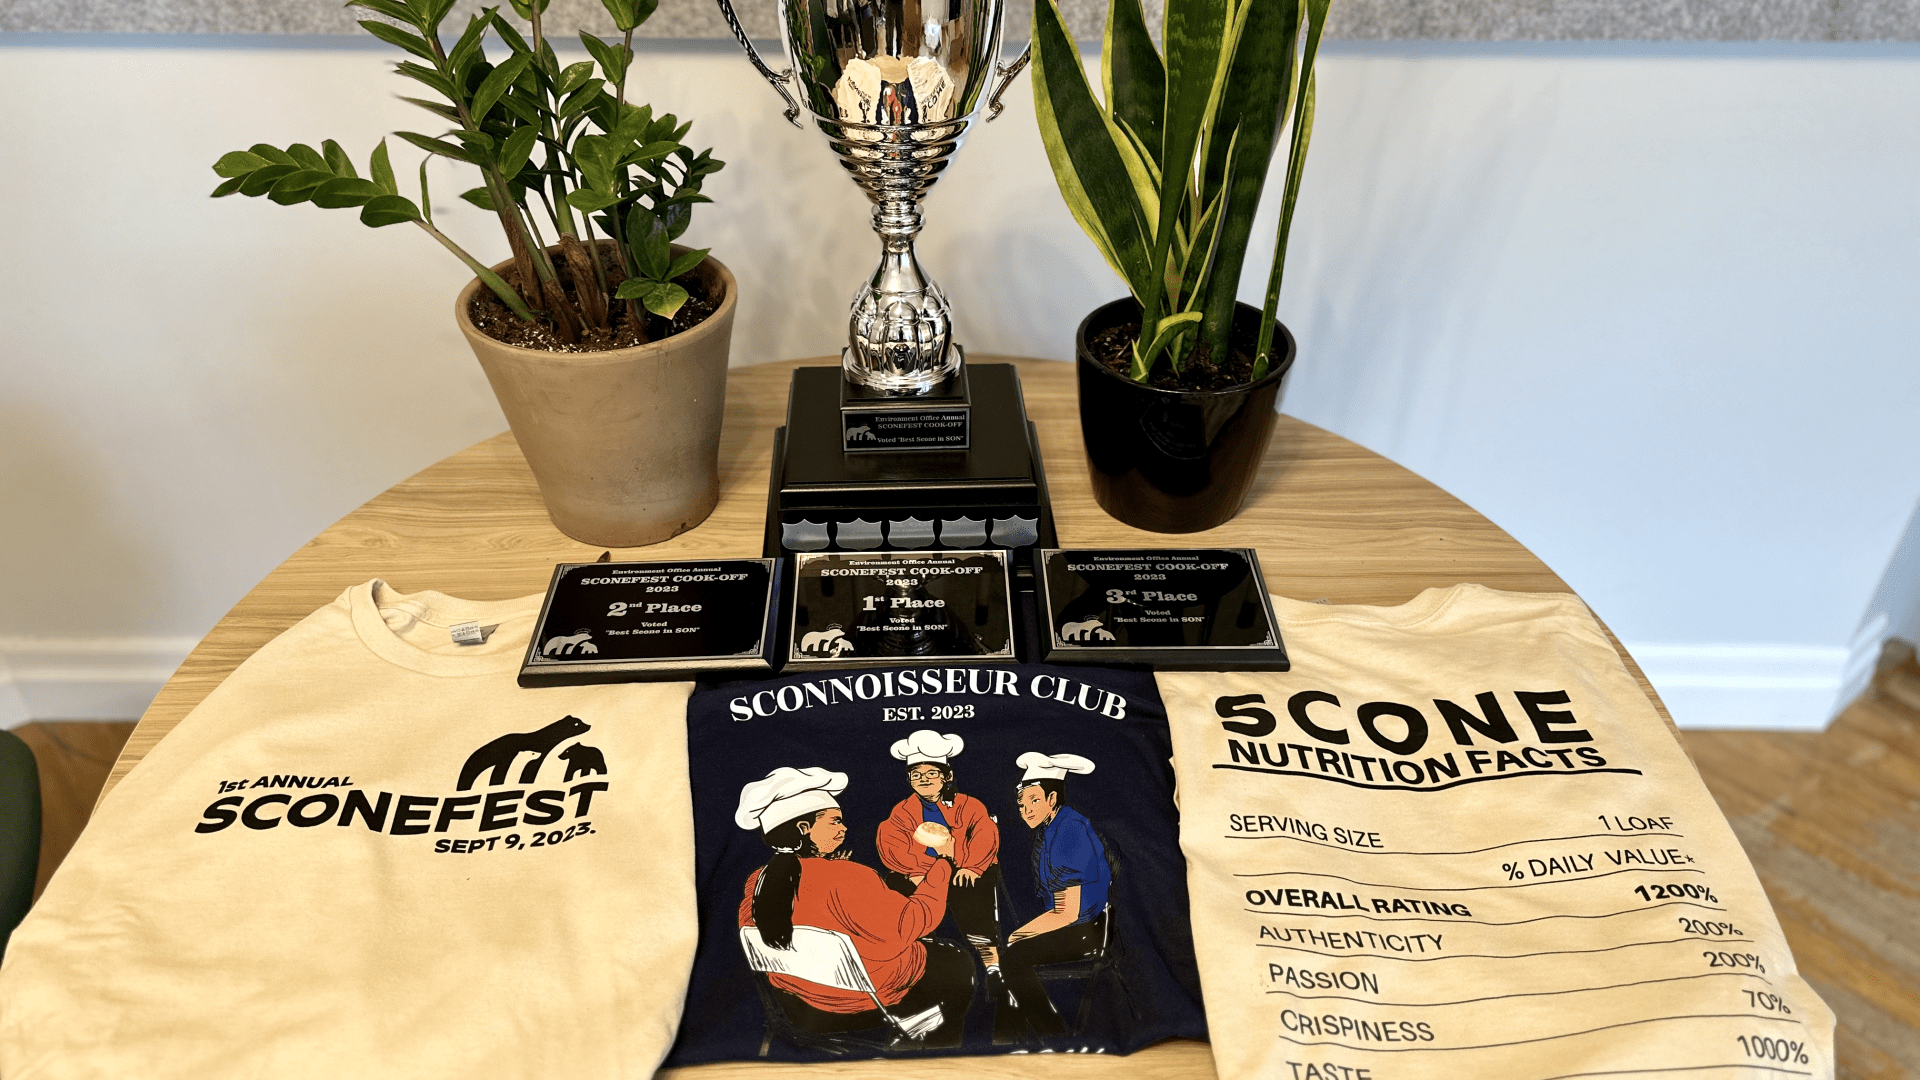 Tshirts and posters for Sconefest 2023